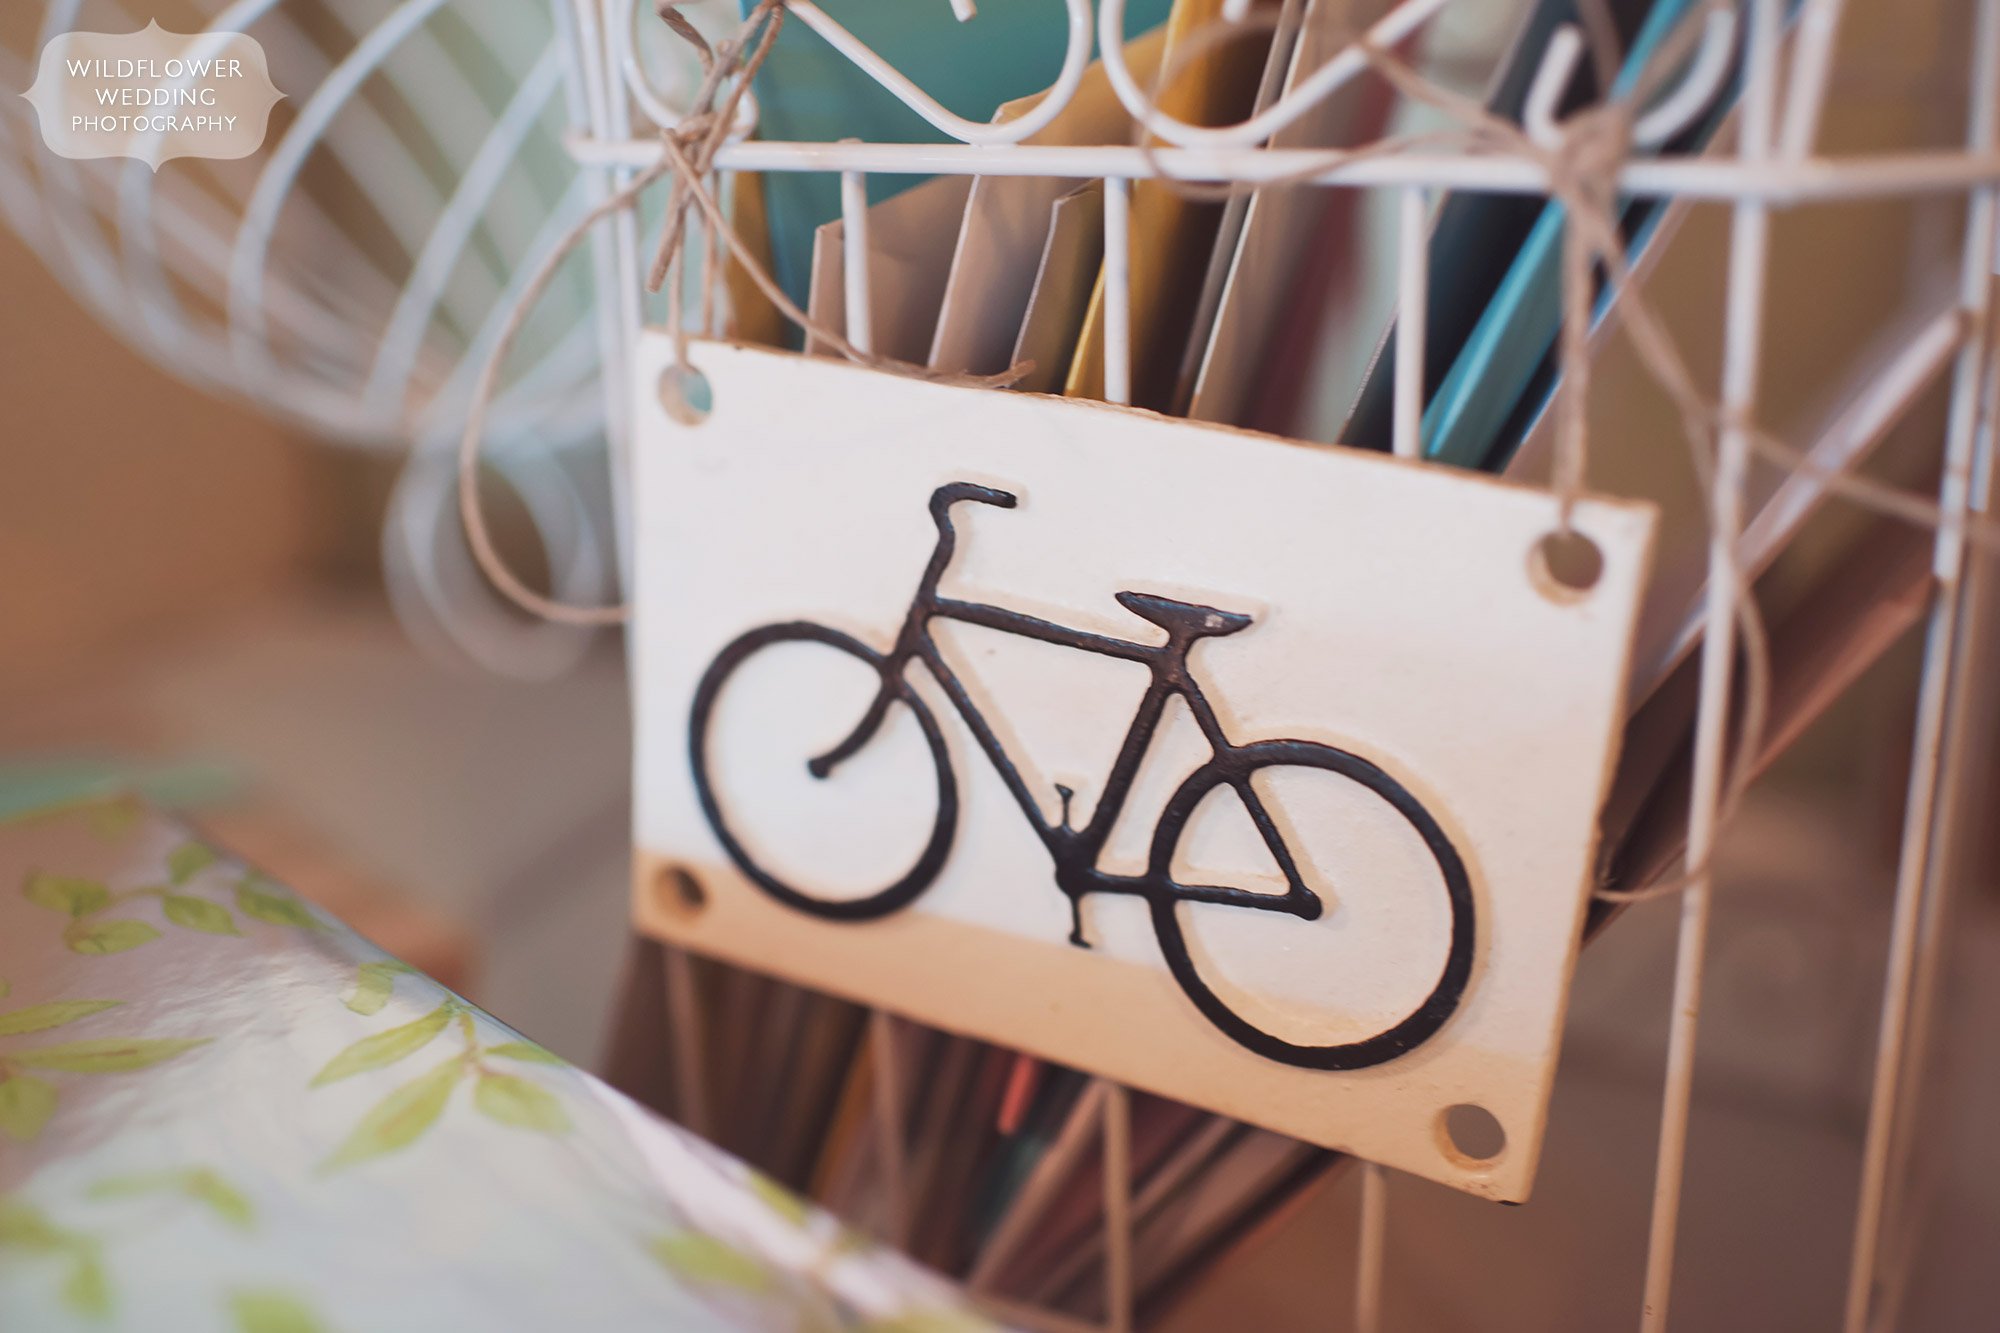 Bicycle basket for holding wedding cards